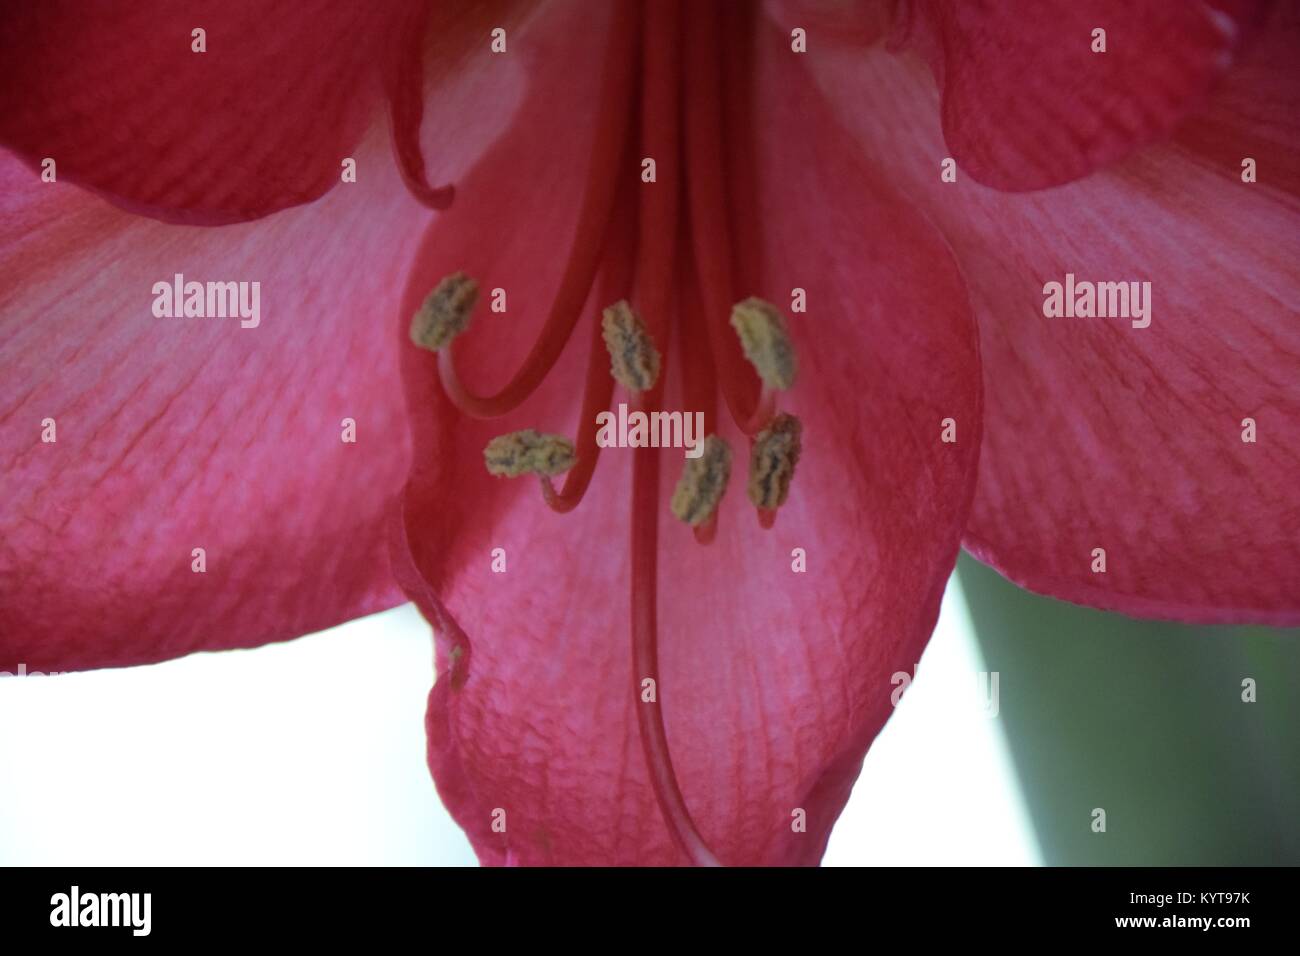 pink hippeastrum shown in abstract Stock Photo